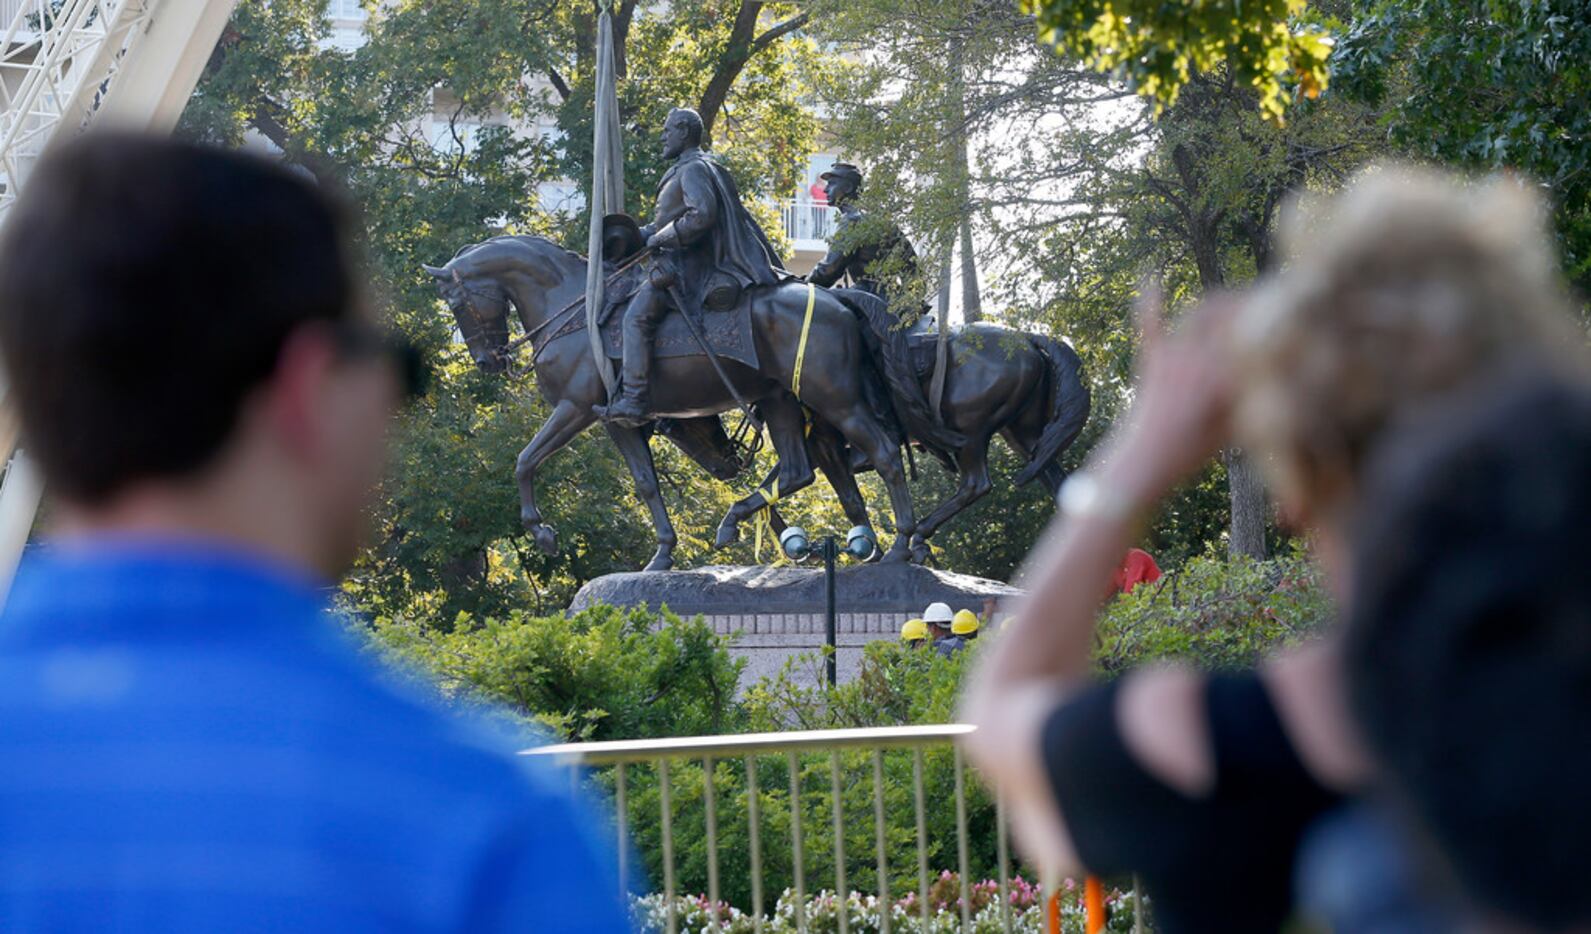 People watch crew members work to remove the Robert E. Lee statue at Robert E. Lee Park in...